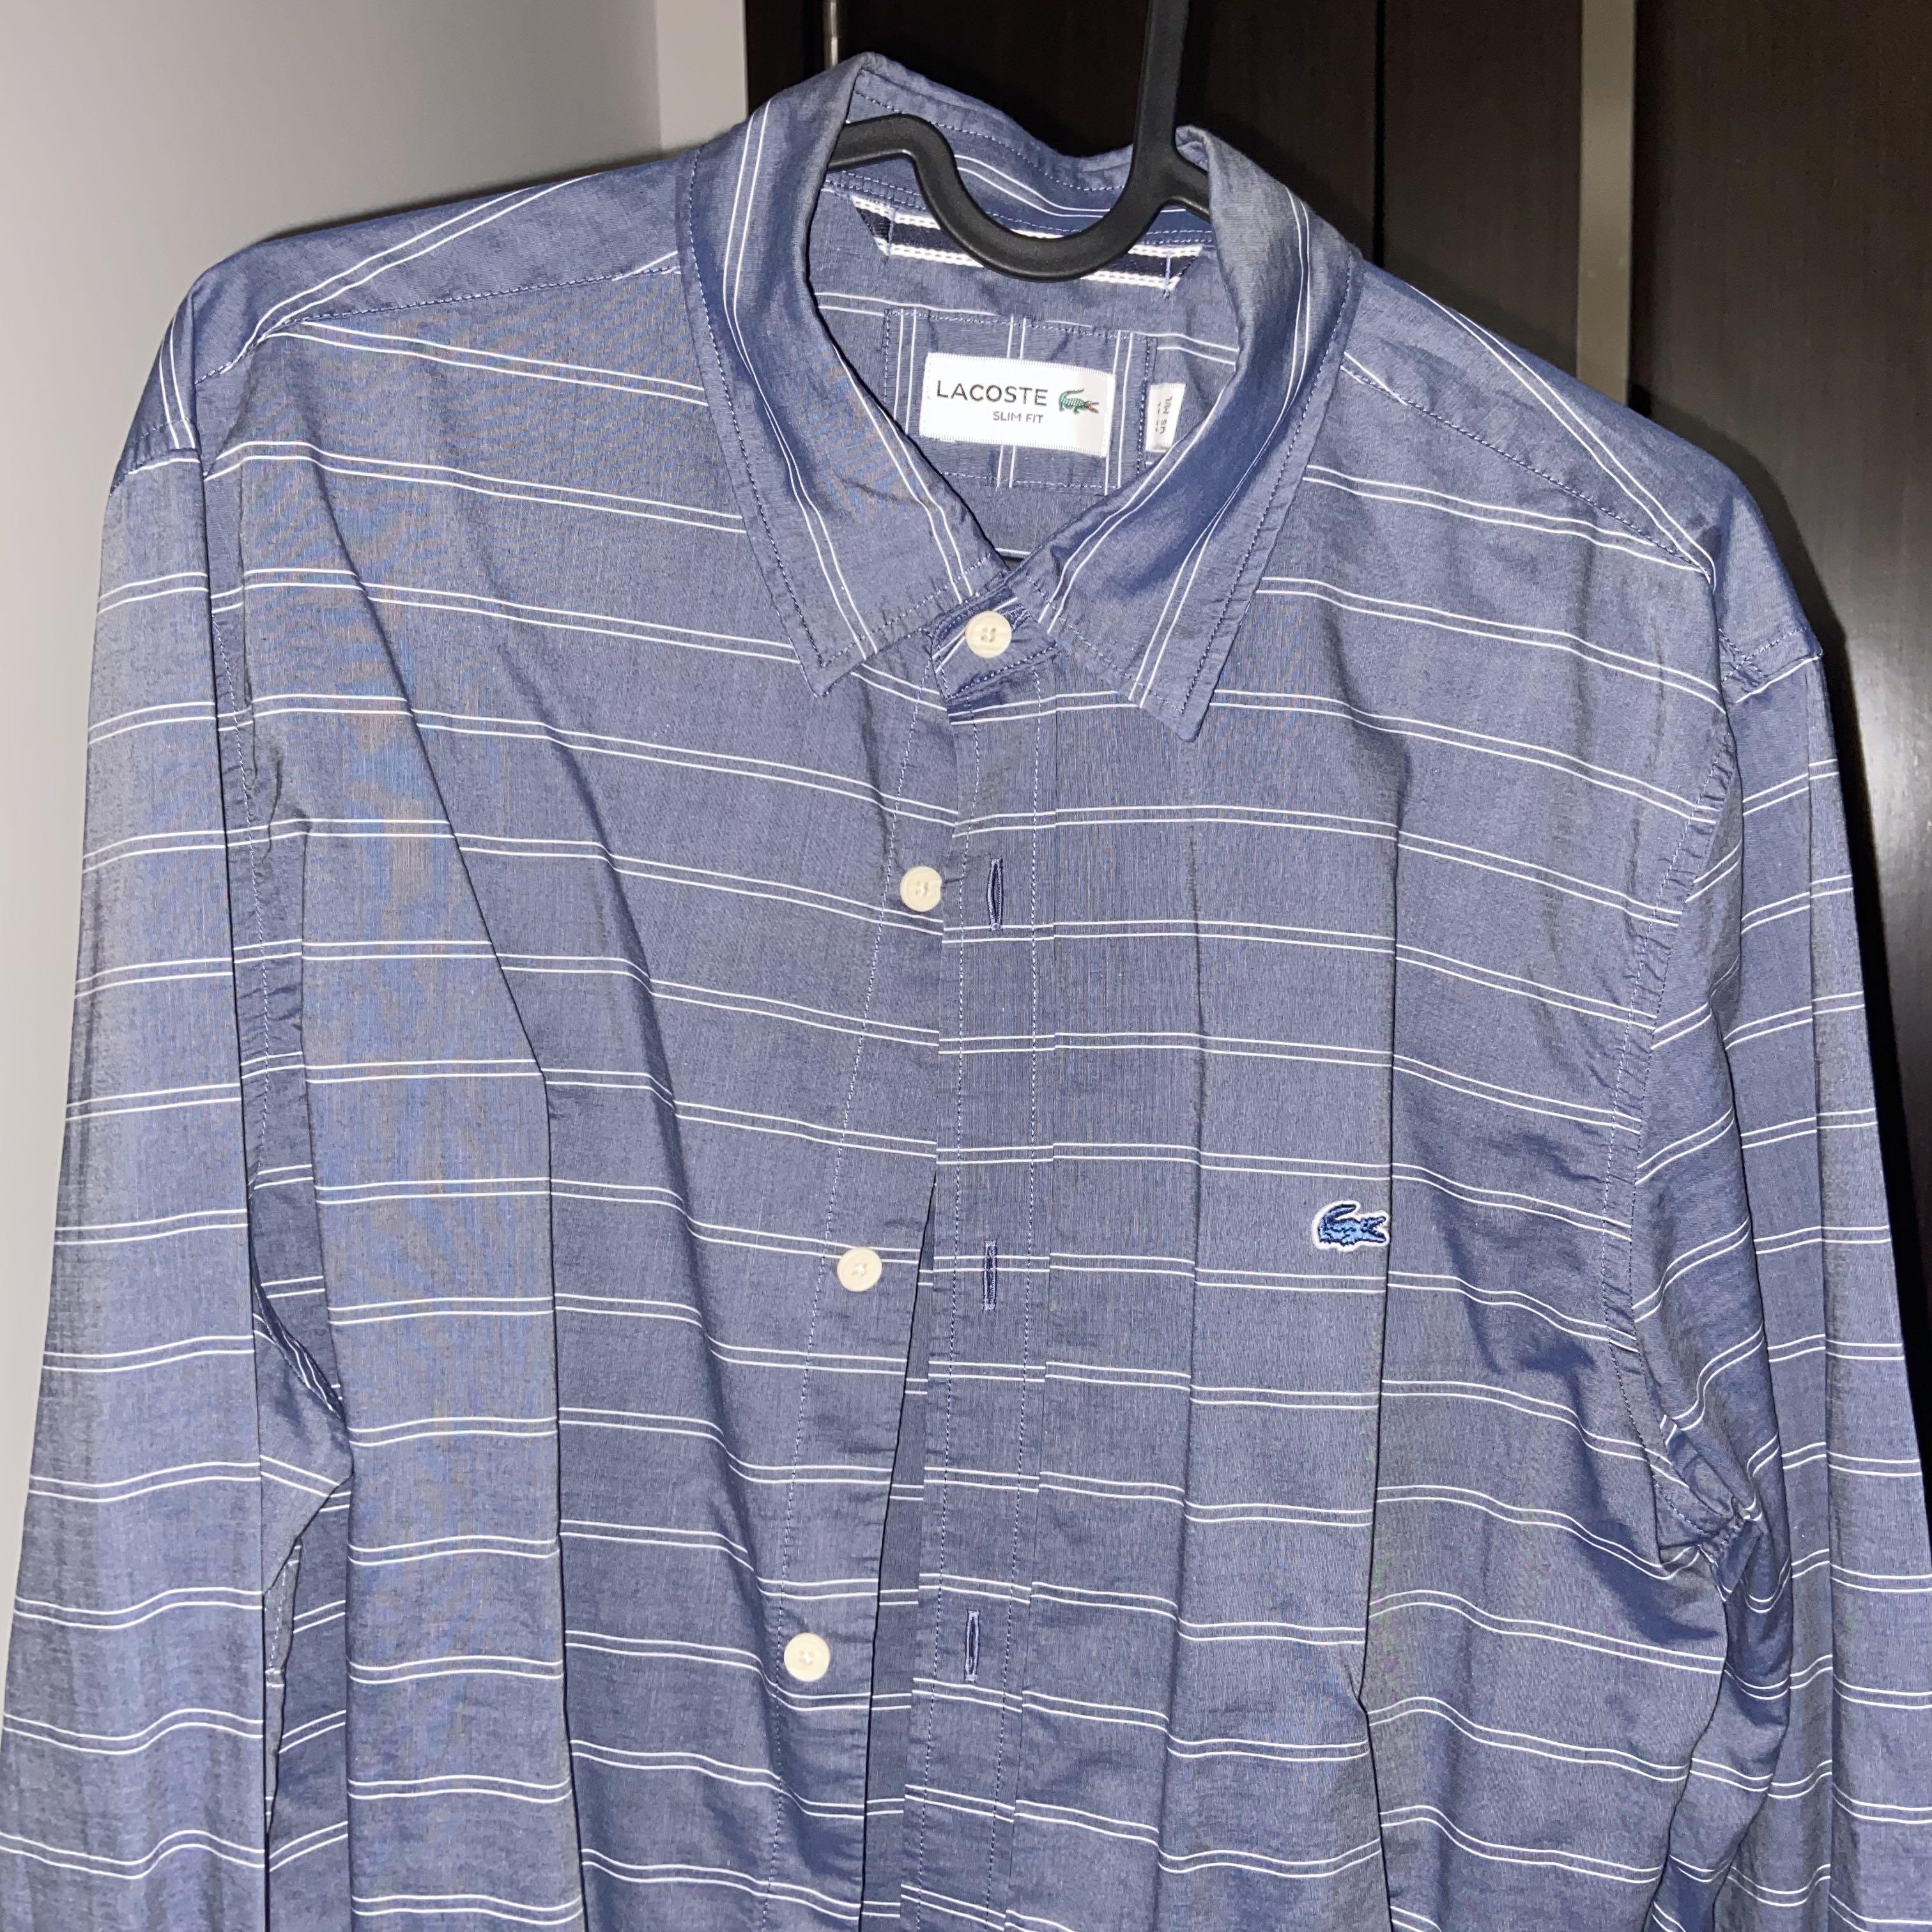 lacoste button up shirt